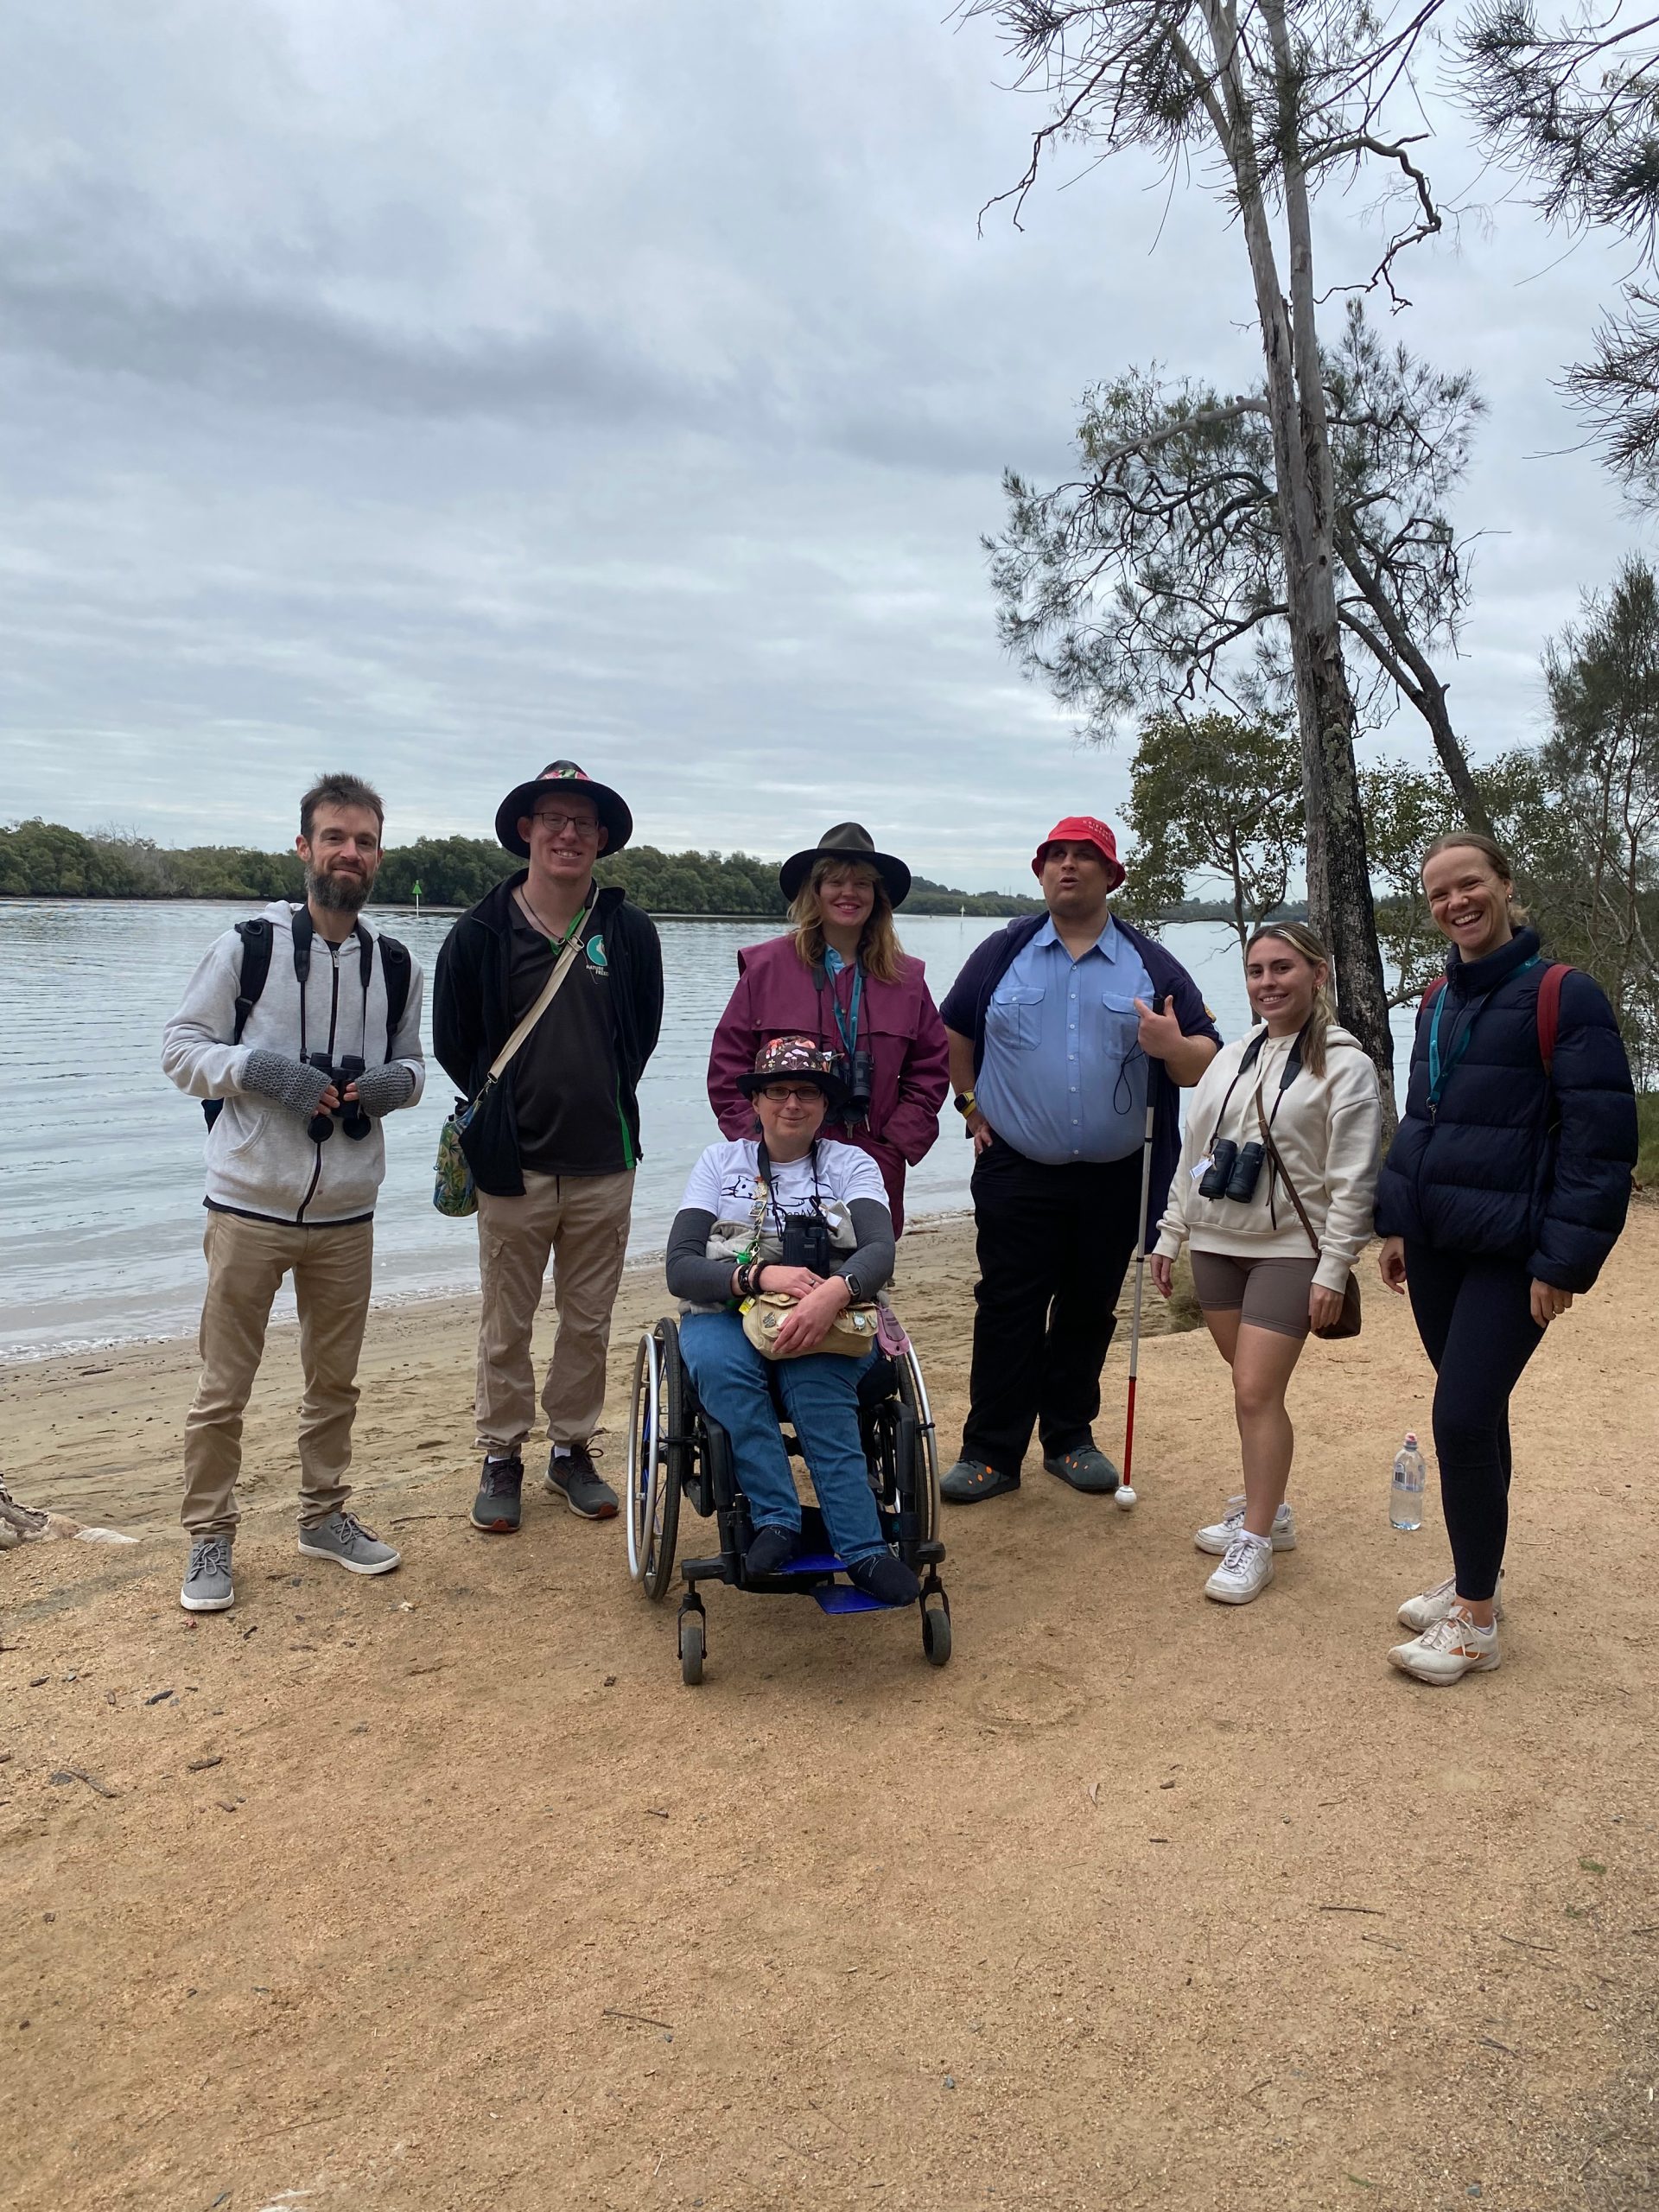 A group of six smiling people, including a woman in a wheelchair, standing on a sandy shoreline near a couple of gumtrees.